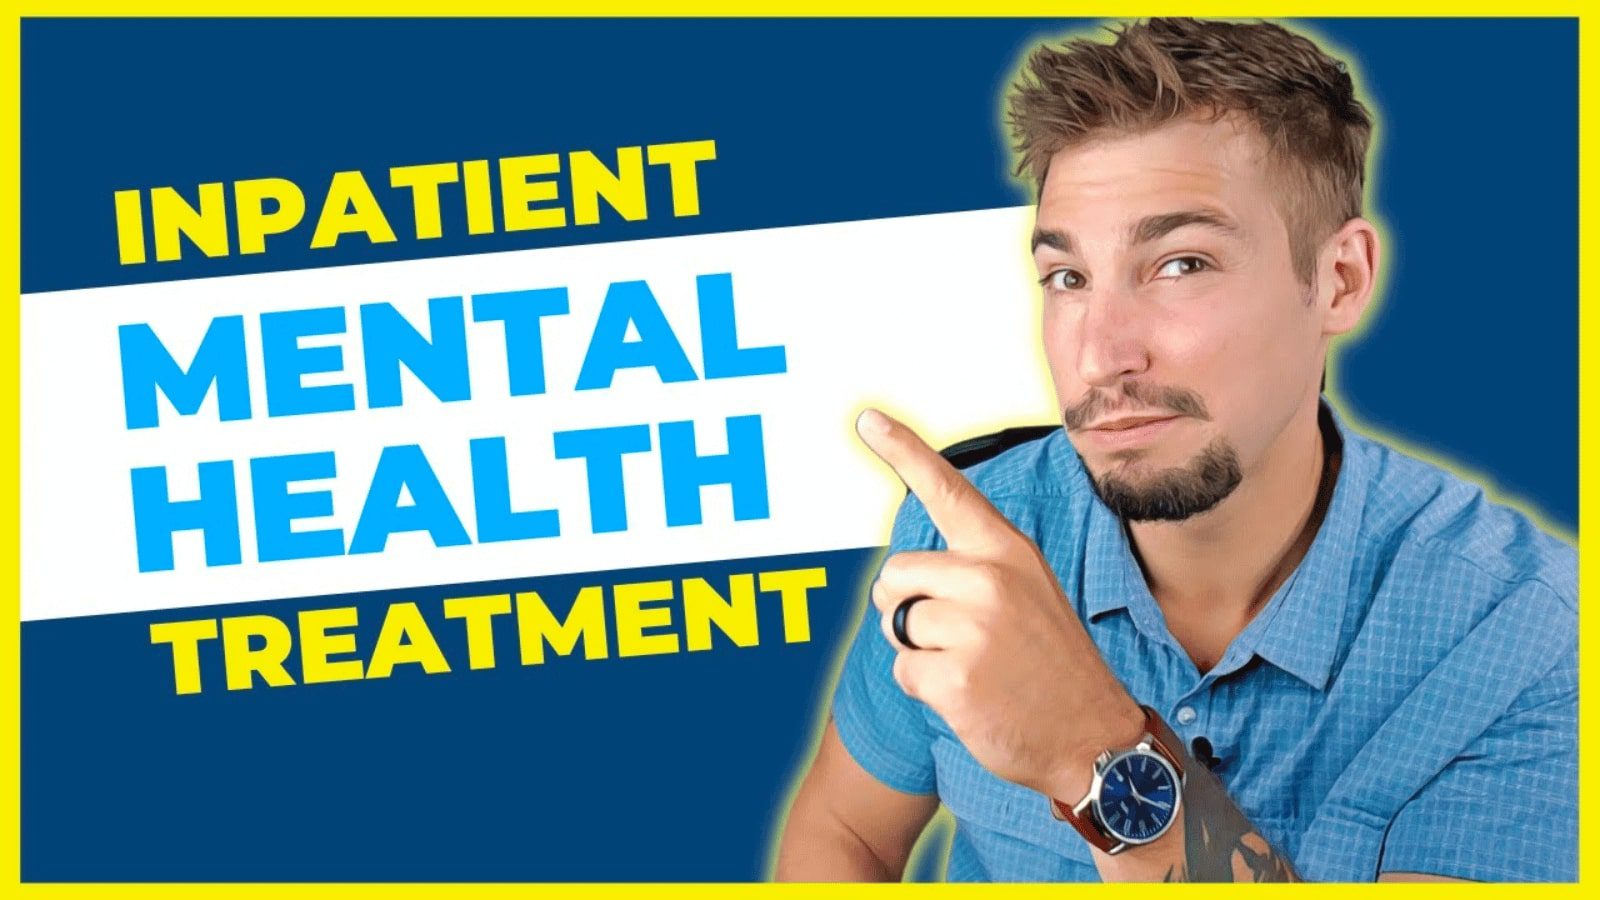 A man pointing at a "Inpatient mental health treatment" text